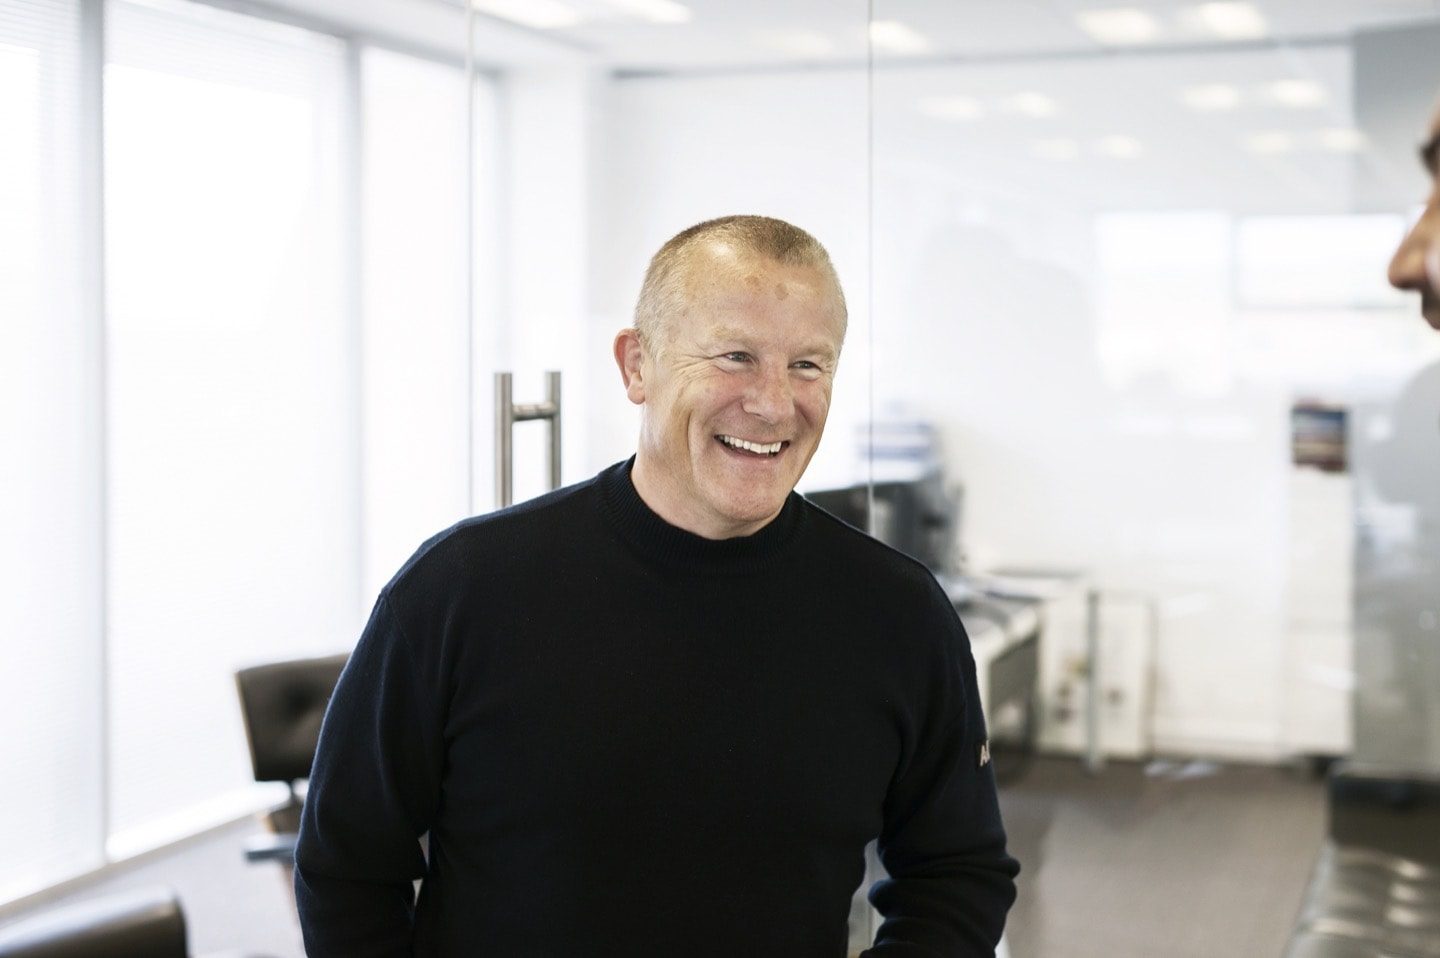 Neil Woodford discusses collapse of investment fund as he unveils plans for new venture